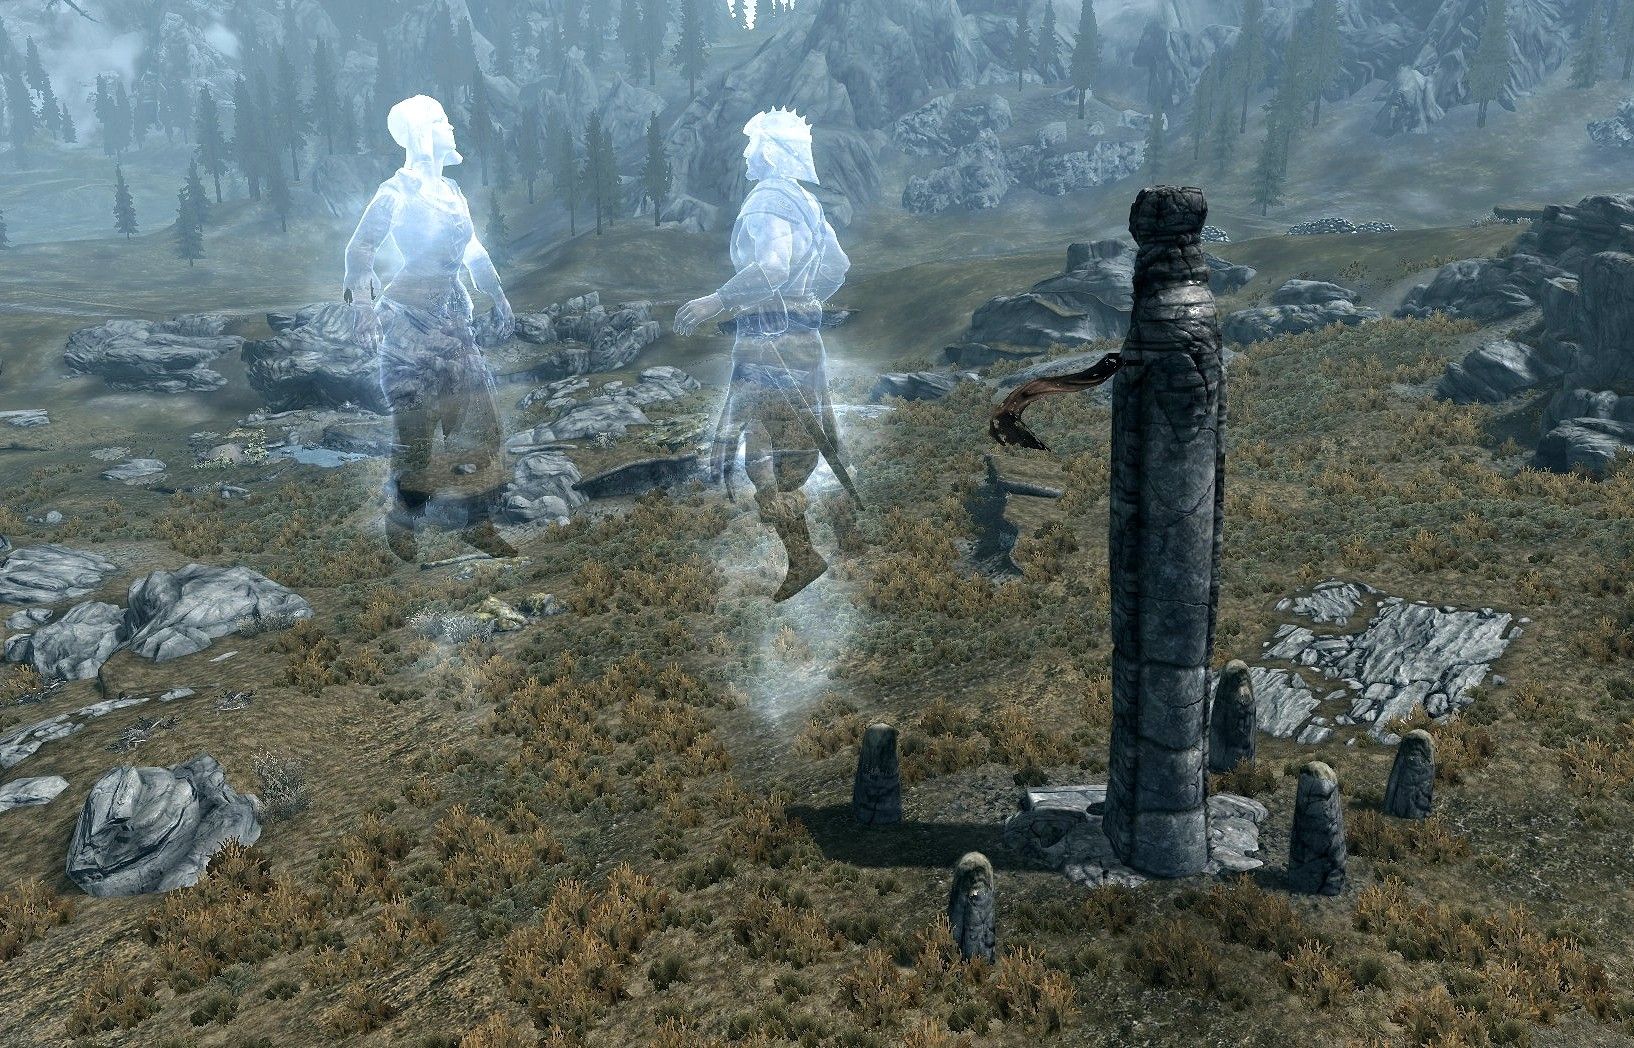 Ghosts Ruki and Fenrig talking to eachother by Gjukar's Monument in Skyrim.